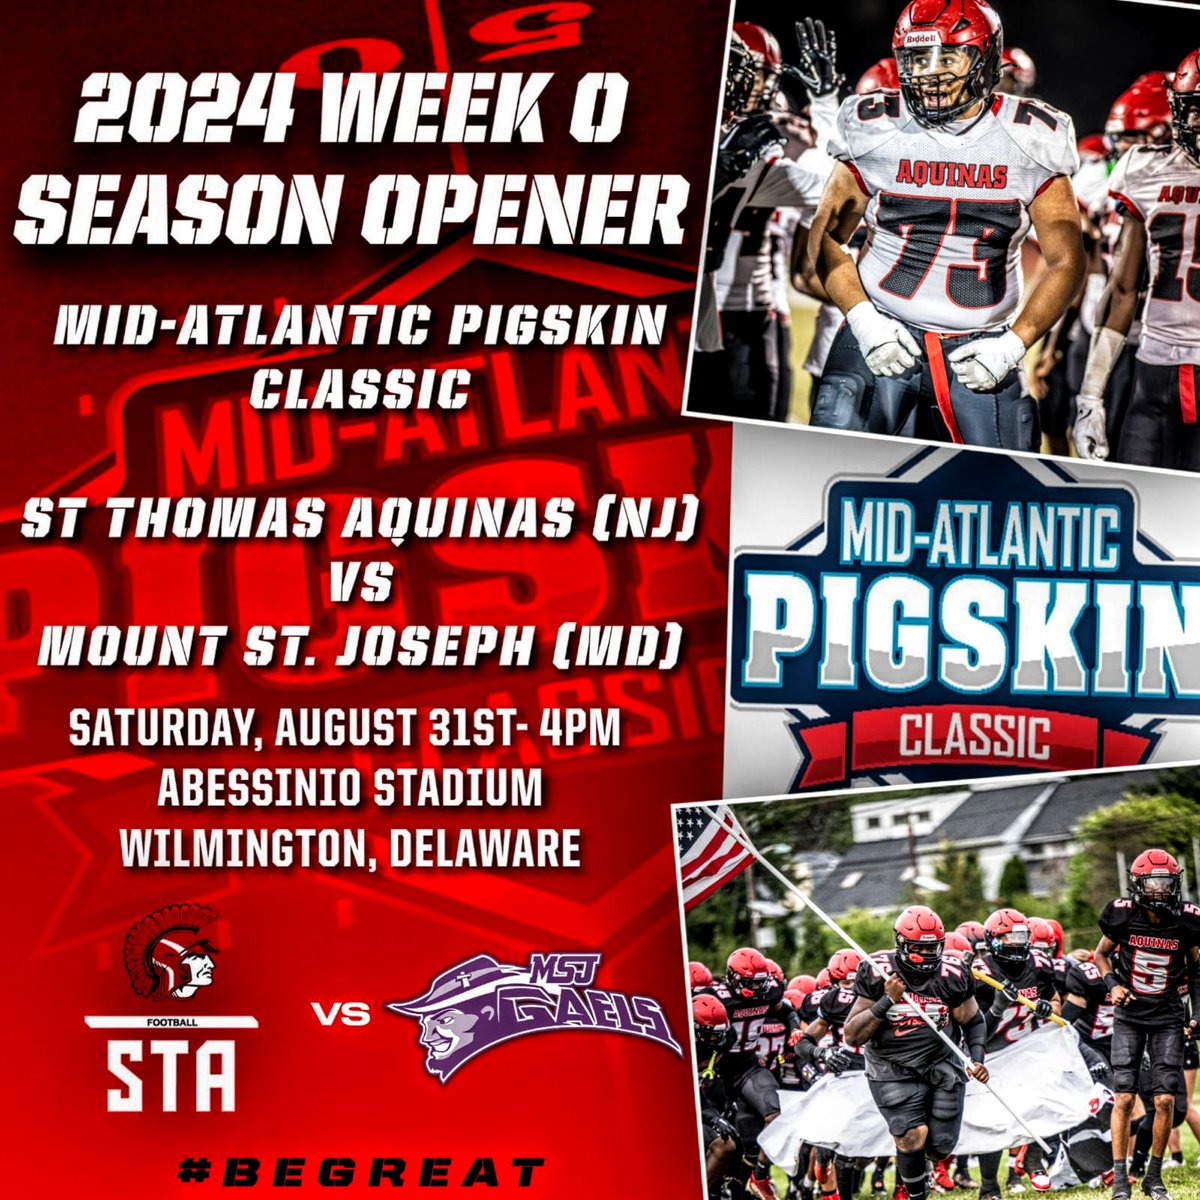 TRAVELIN' TROJANS! STA is hitting the road once again for our Season Opener, this time in Delaware as a participant in the Mid-Atlantic Pigskin Classic vs Mount St Joseph (MD)! Saturday August 31st, 4pm @ Abessinio Stadium in Wilmington, DE. 169 days to #BEGREAT